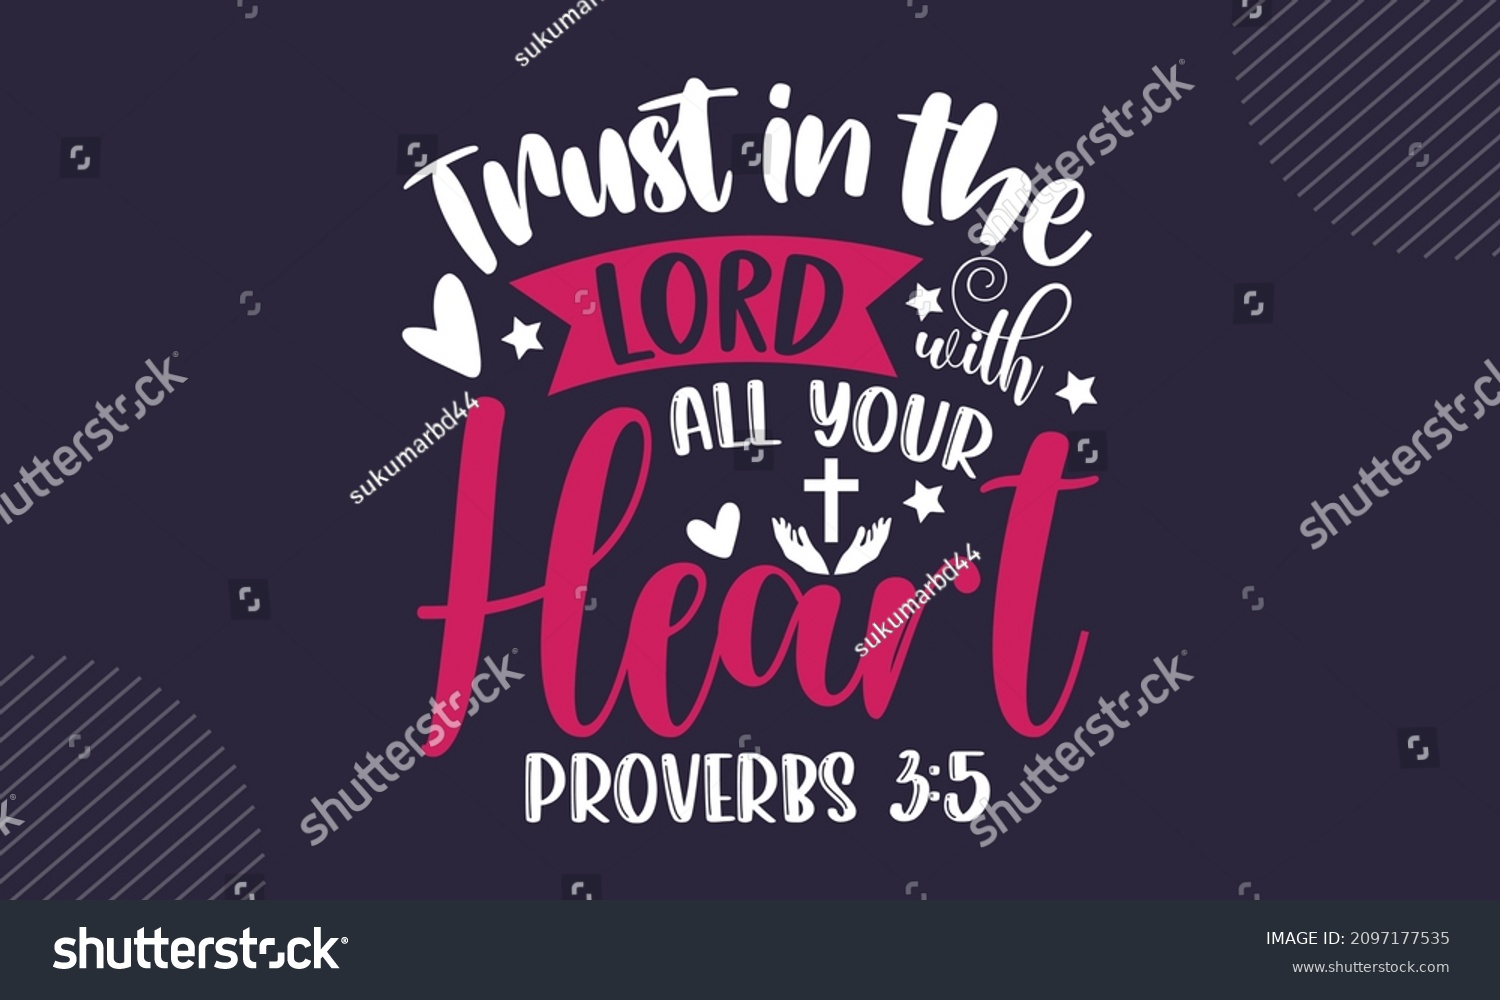 SVG of Trust in the lord with all your heart proverbs 3:5 - Christian Easter t shirt design, svg Files for Cutting Cricut and Silhouette, card, Hand drawn lettering phrase, Calligraphy t shirt design, isolat svg